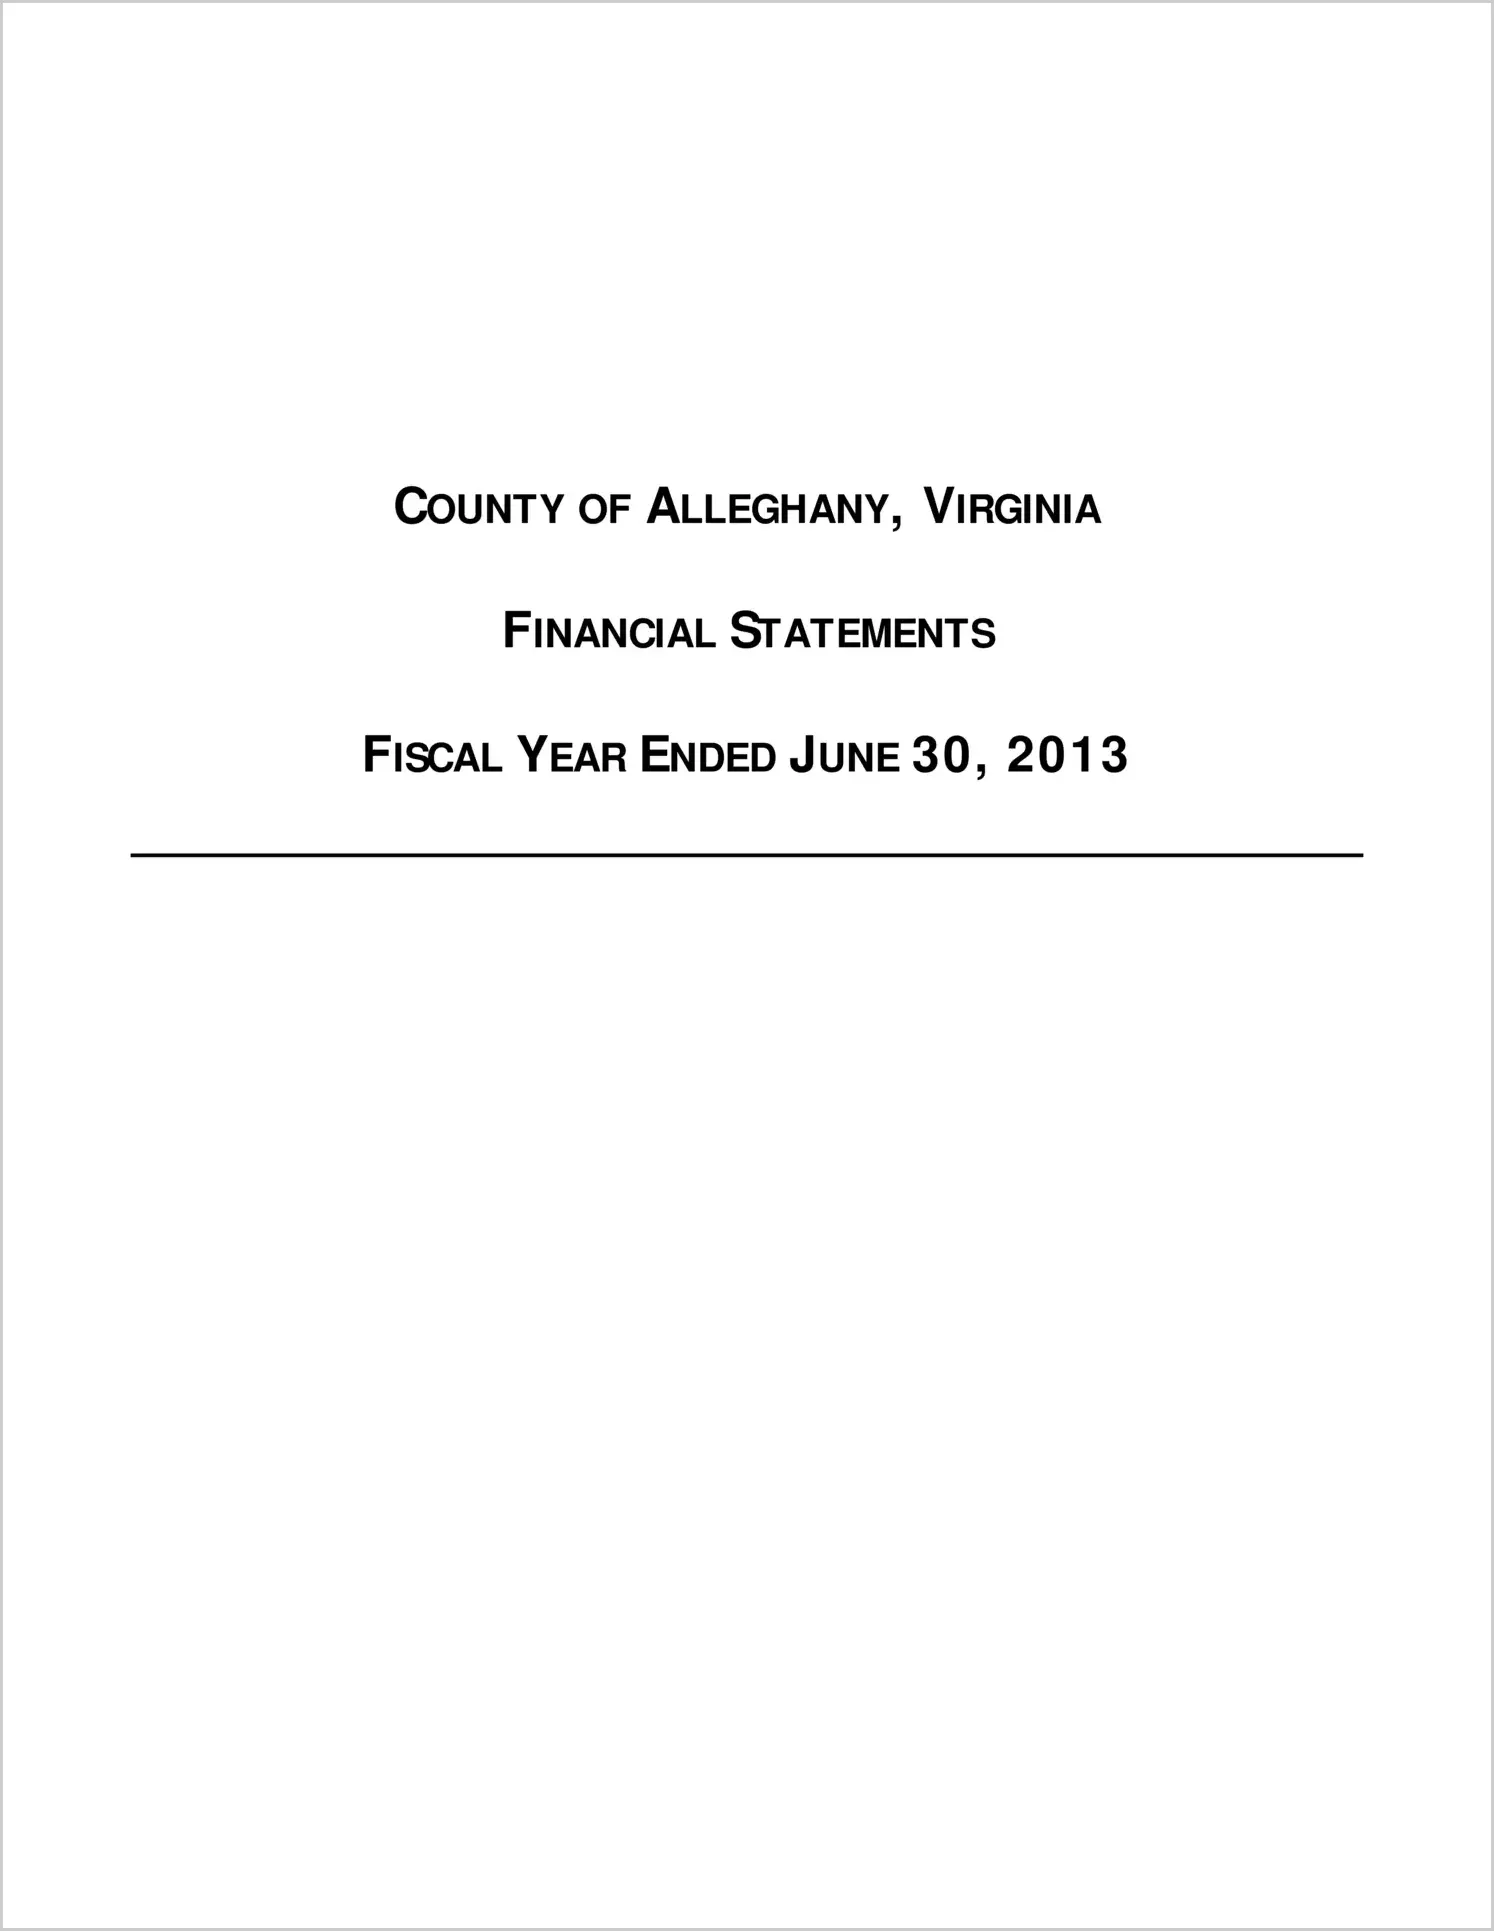 2013 Annual Financial Report for County of Alleghany